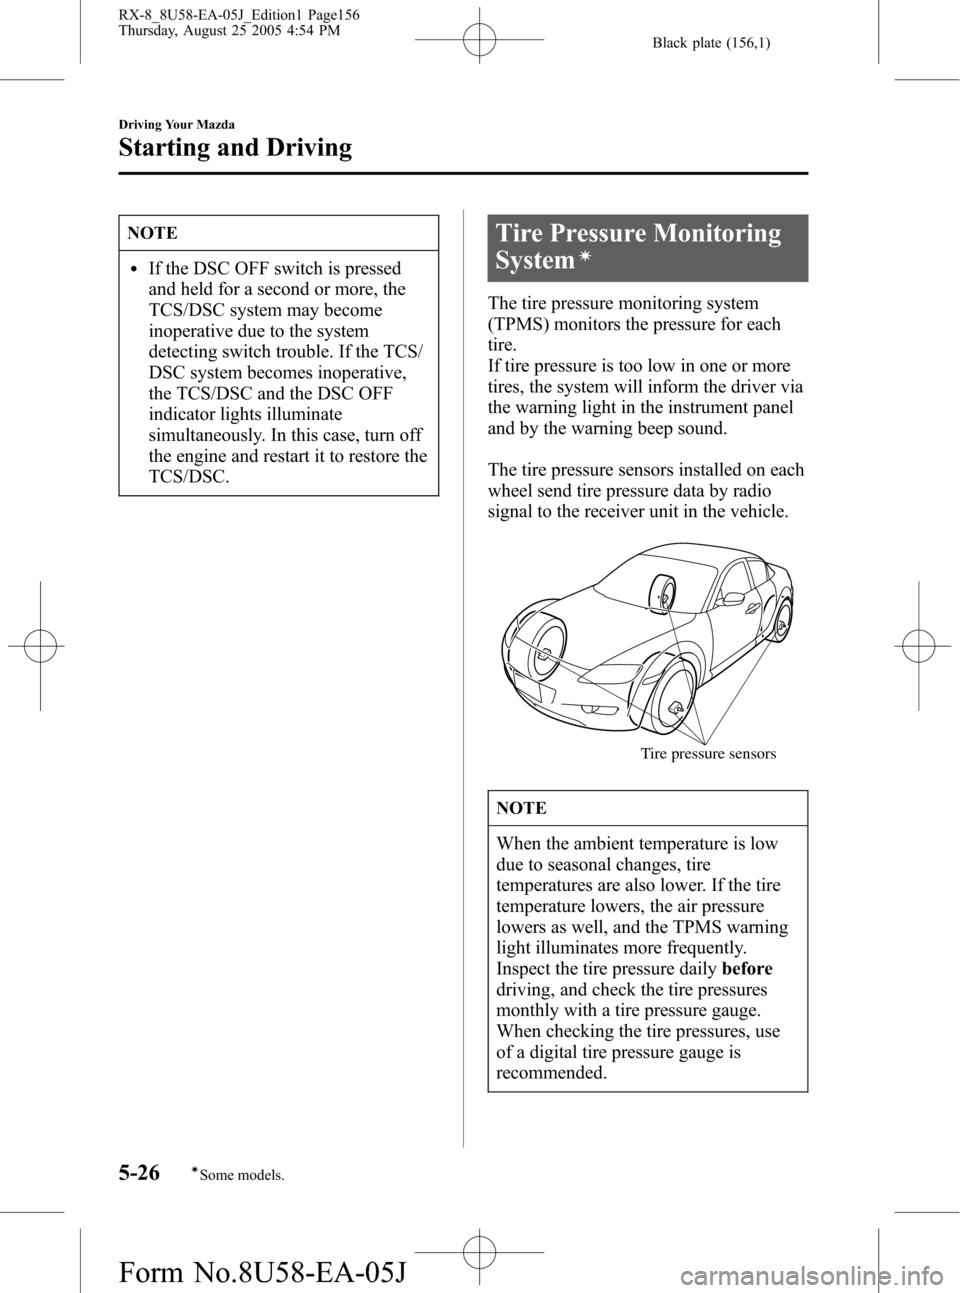 MAZDA MODEL RX 8 2006  Owners Manual (in English) Black plate (156,1)
NOTE
lIf the DSC OFF switch is pressed
and held for a second or more, the
TCS/DSC system may become
inoperative due to the system
detecting switch trouble. If the TCS/
DSC system b